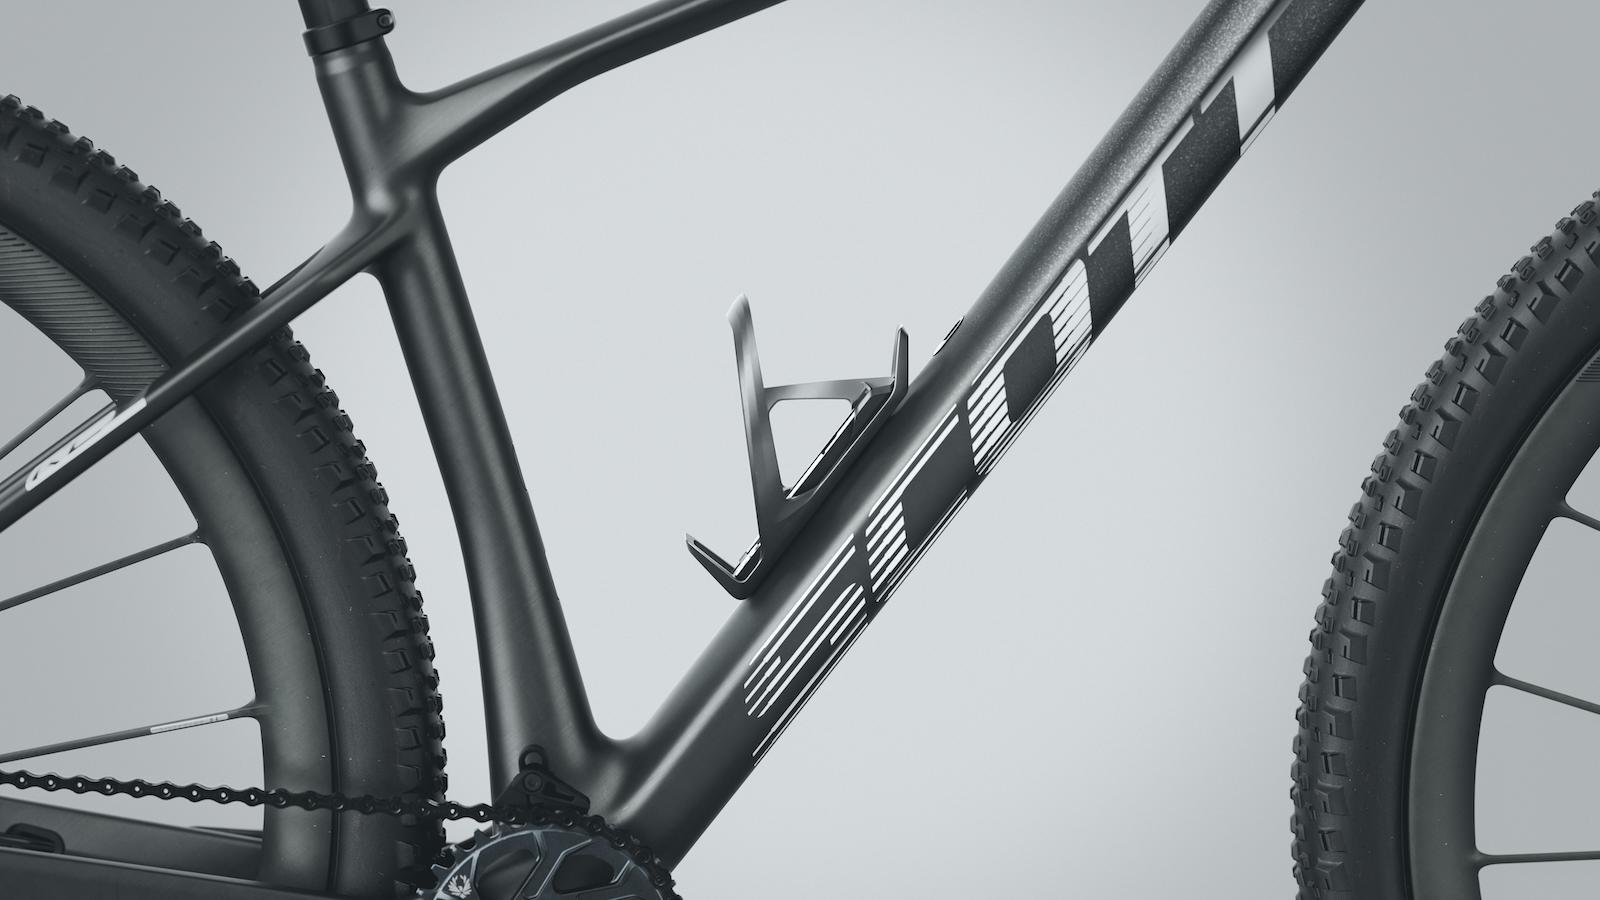 First Look The brand new Scott Scale gets even lighter for 2023